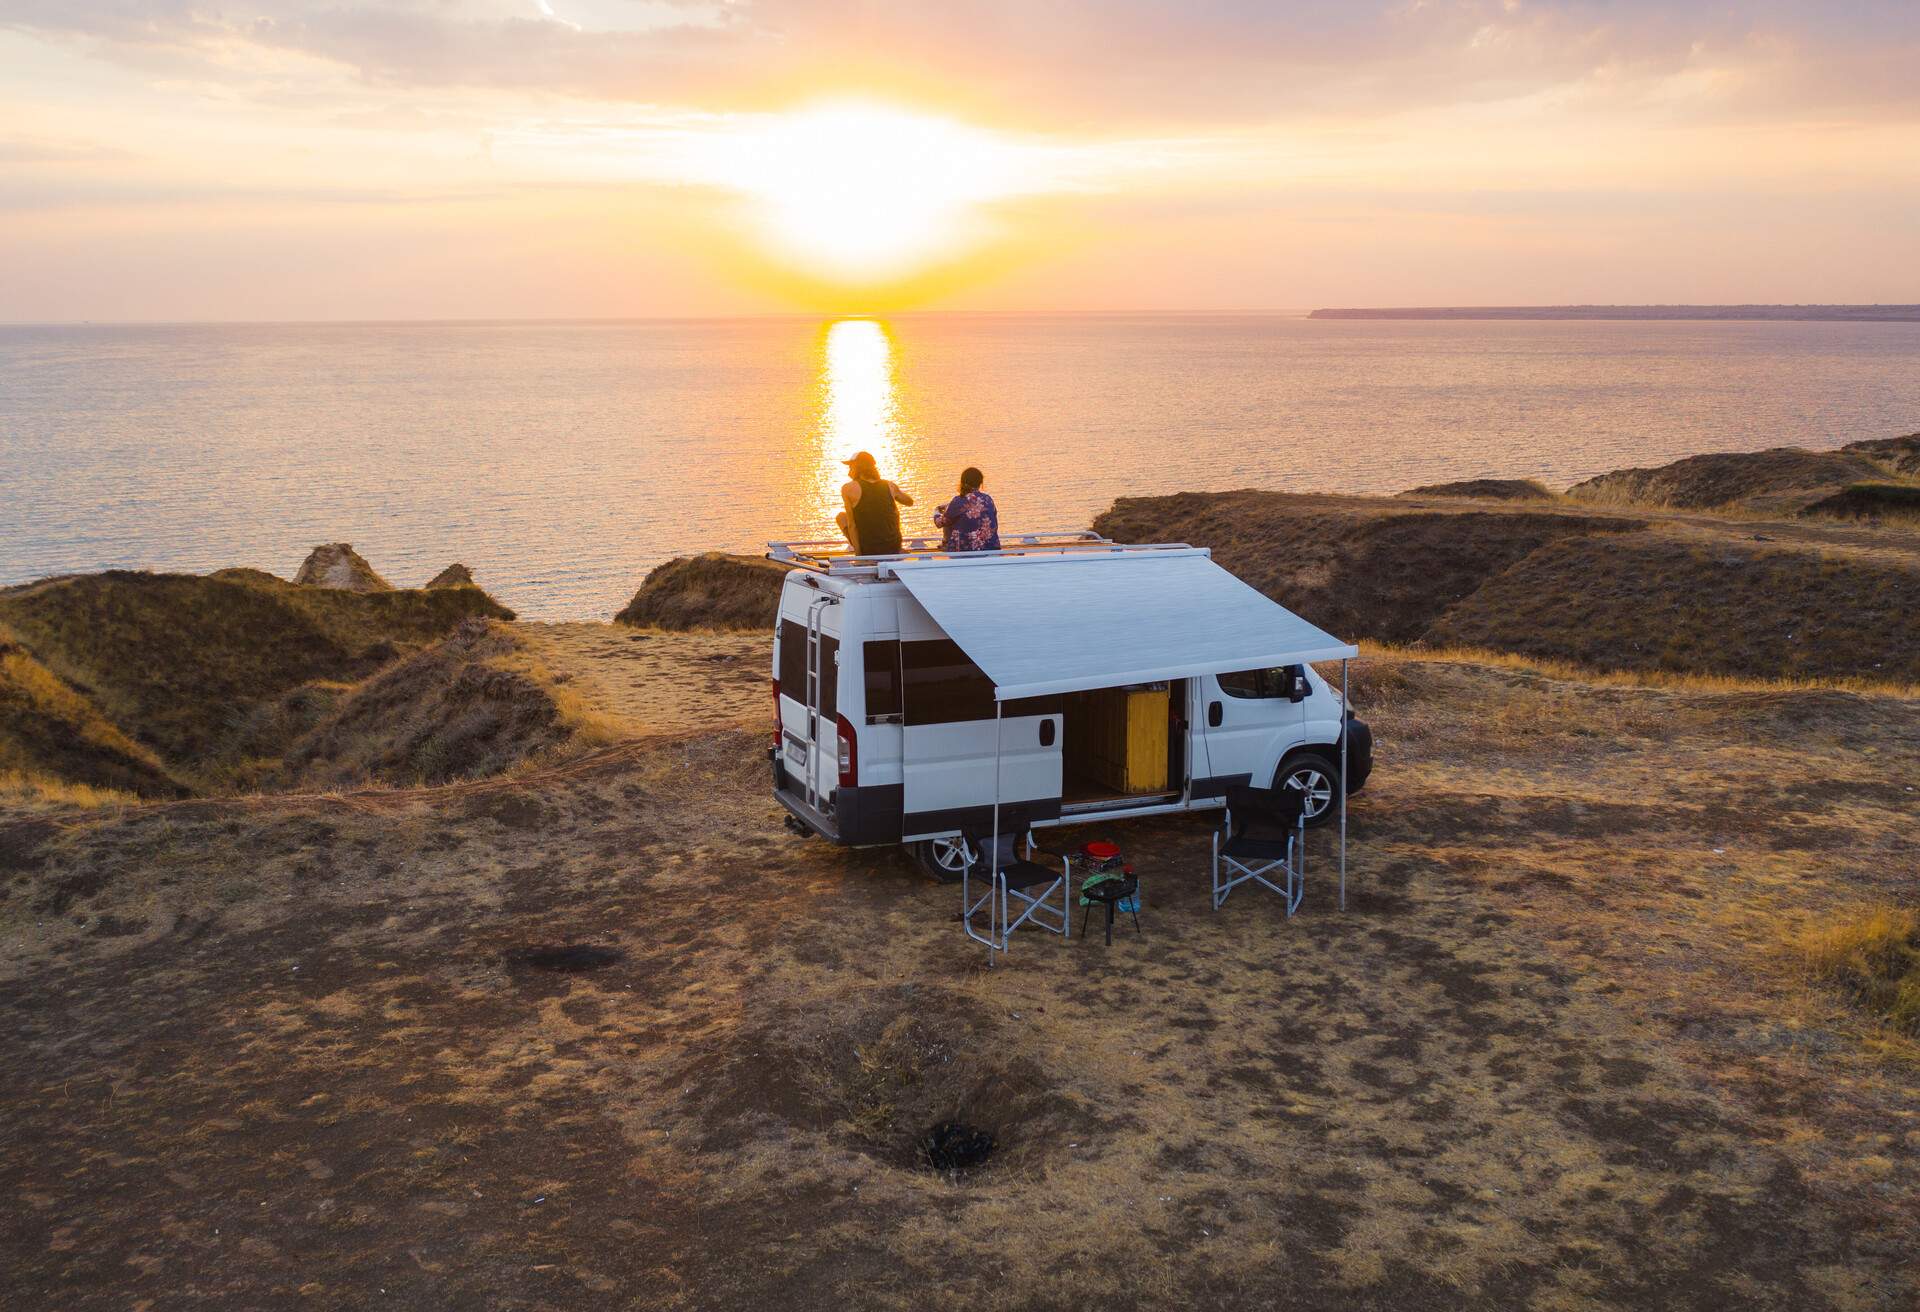 Aerial view of a couple on the roof of camper van on seaside at sunset.